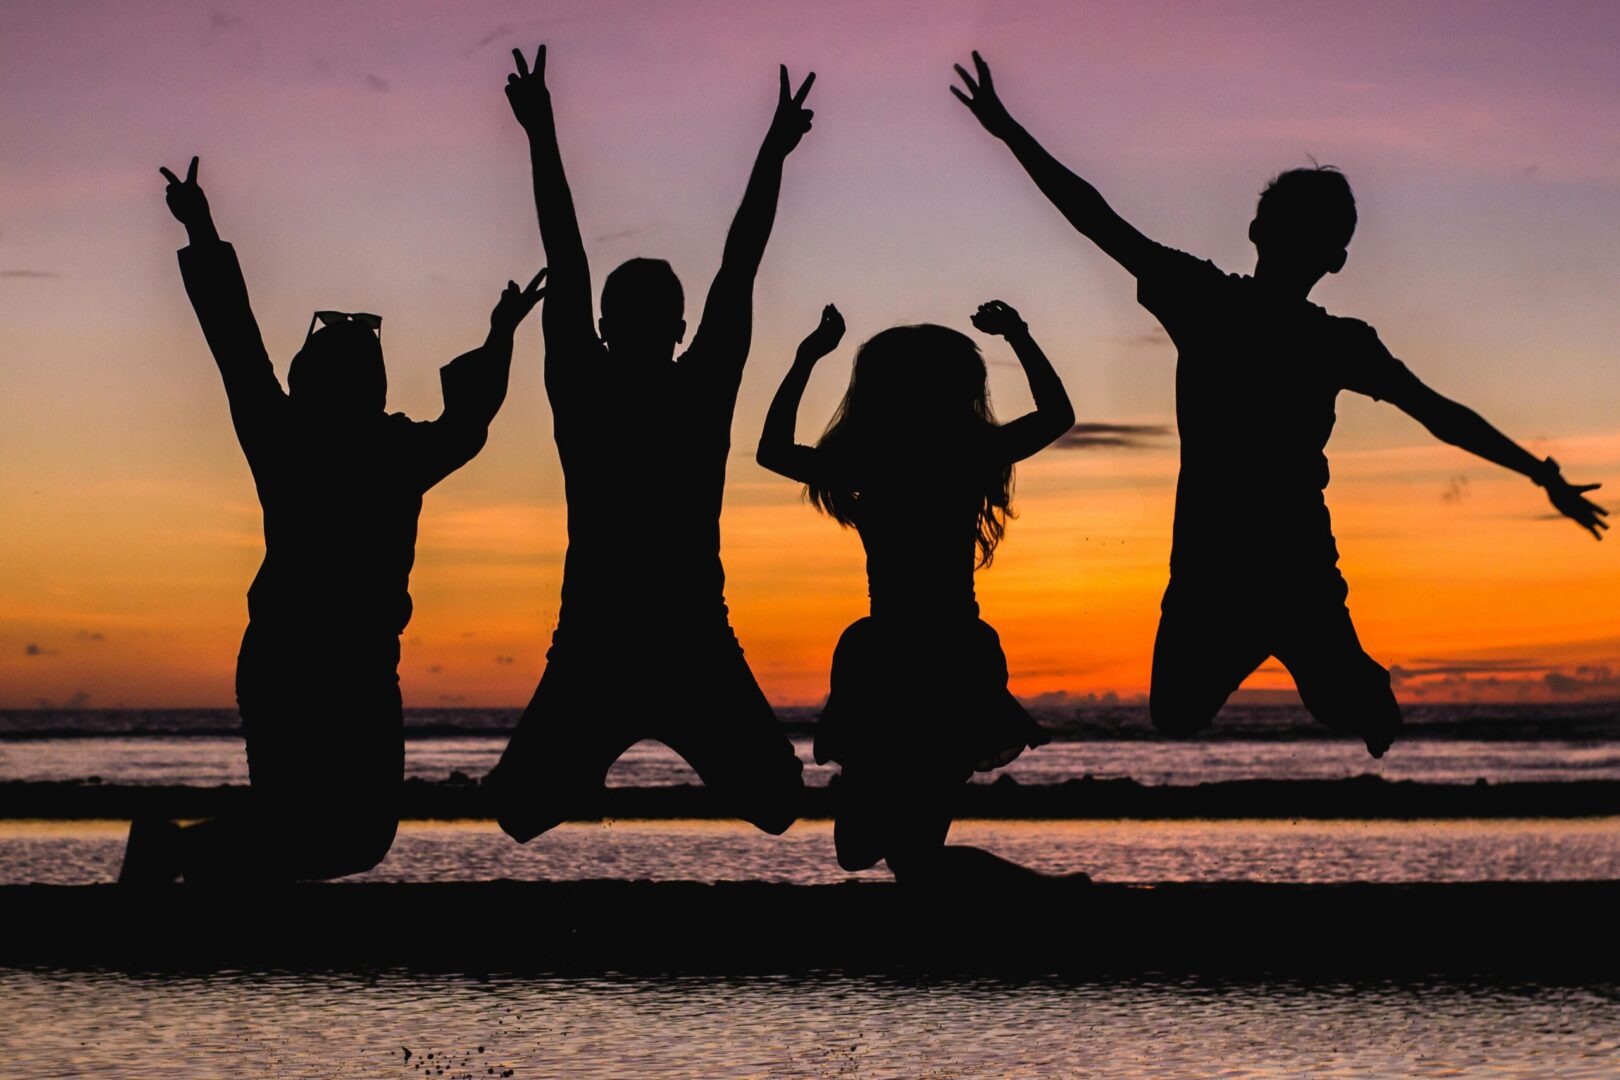 A group of people jumping in the air at sunset.